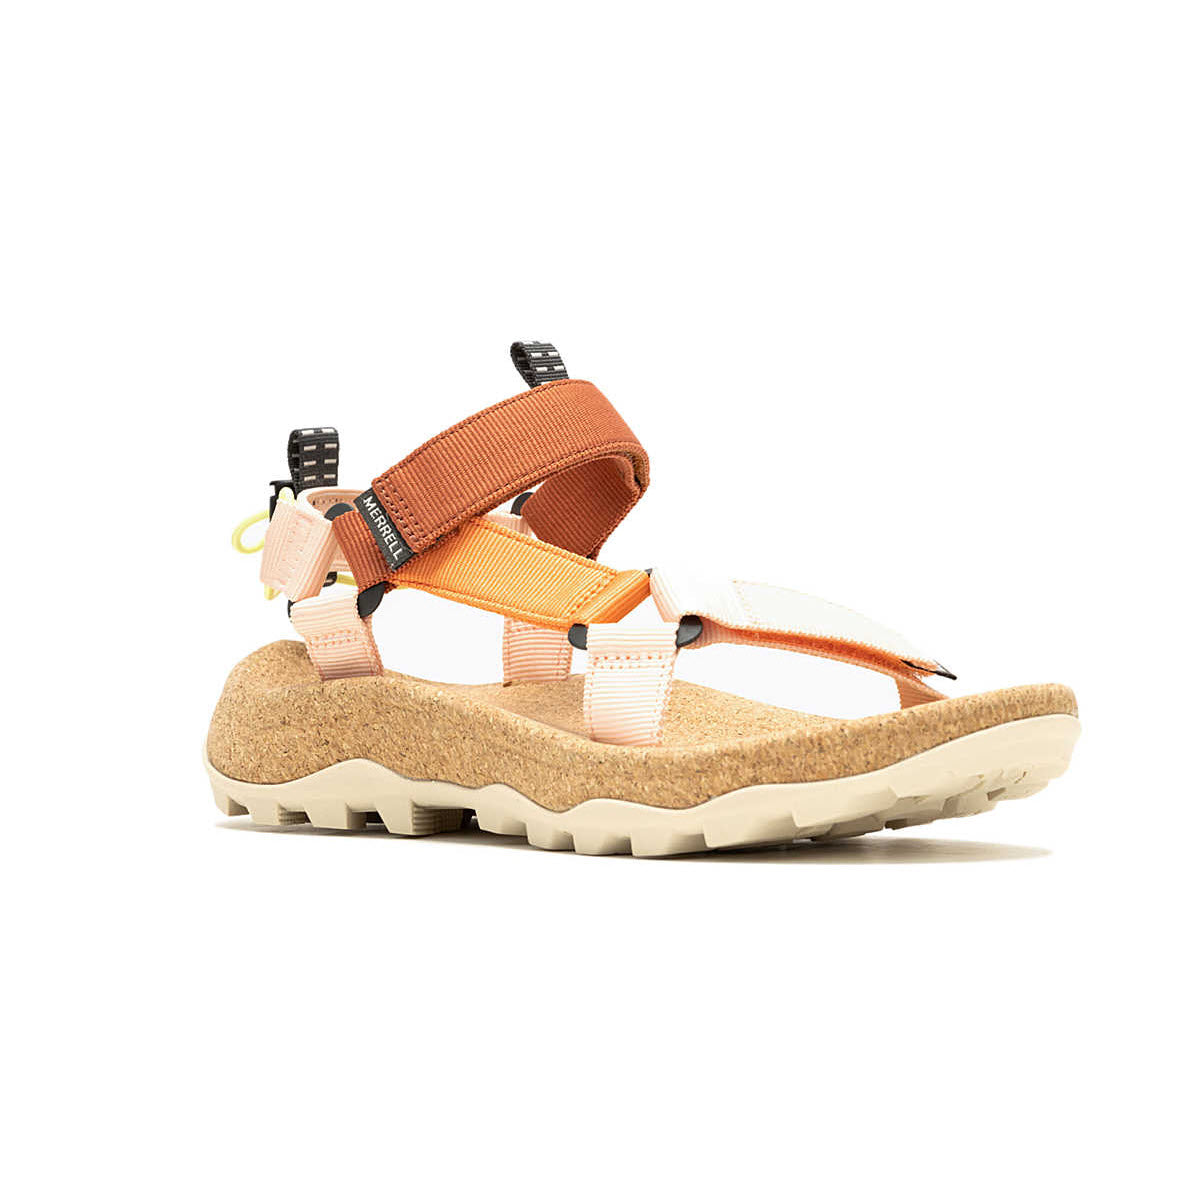 A single Merrell orange and white sandal with adjustable straps featuring hook and loop closure and a cork sole, displayed against a white background.